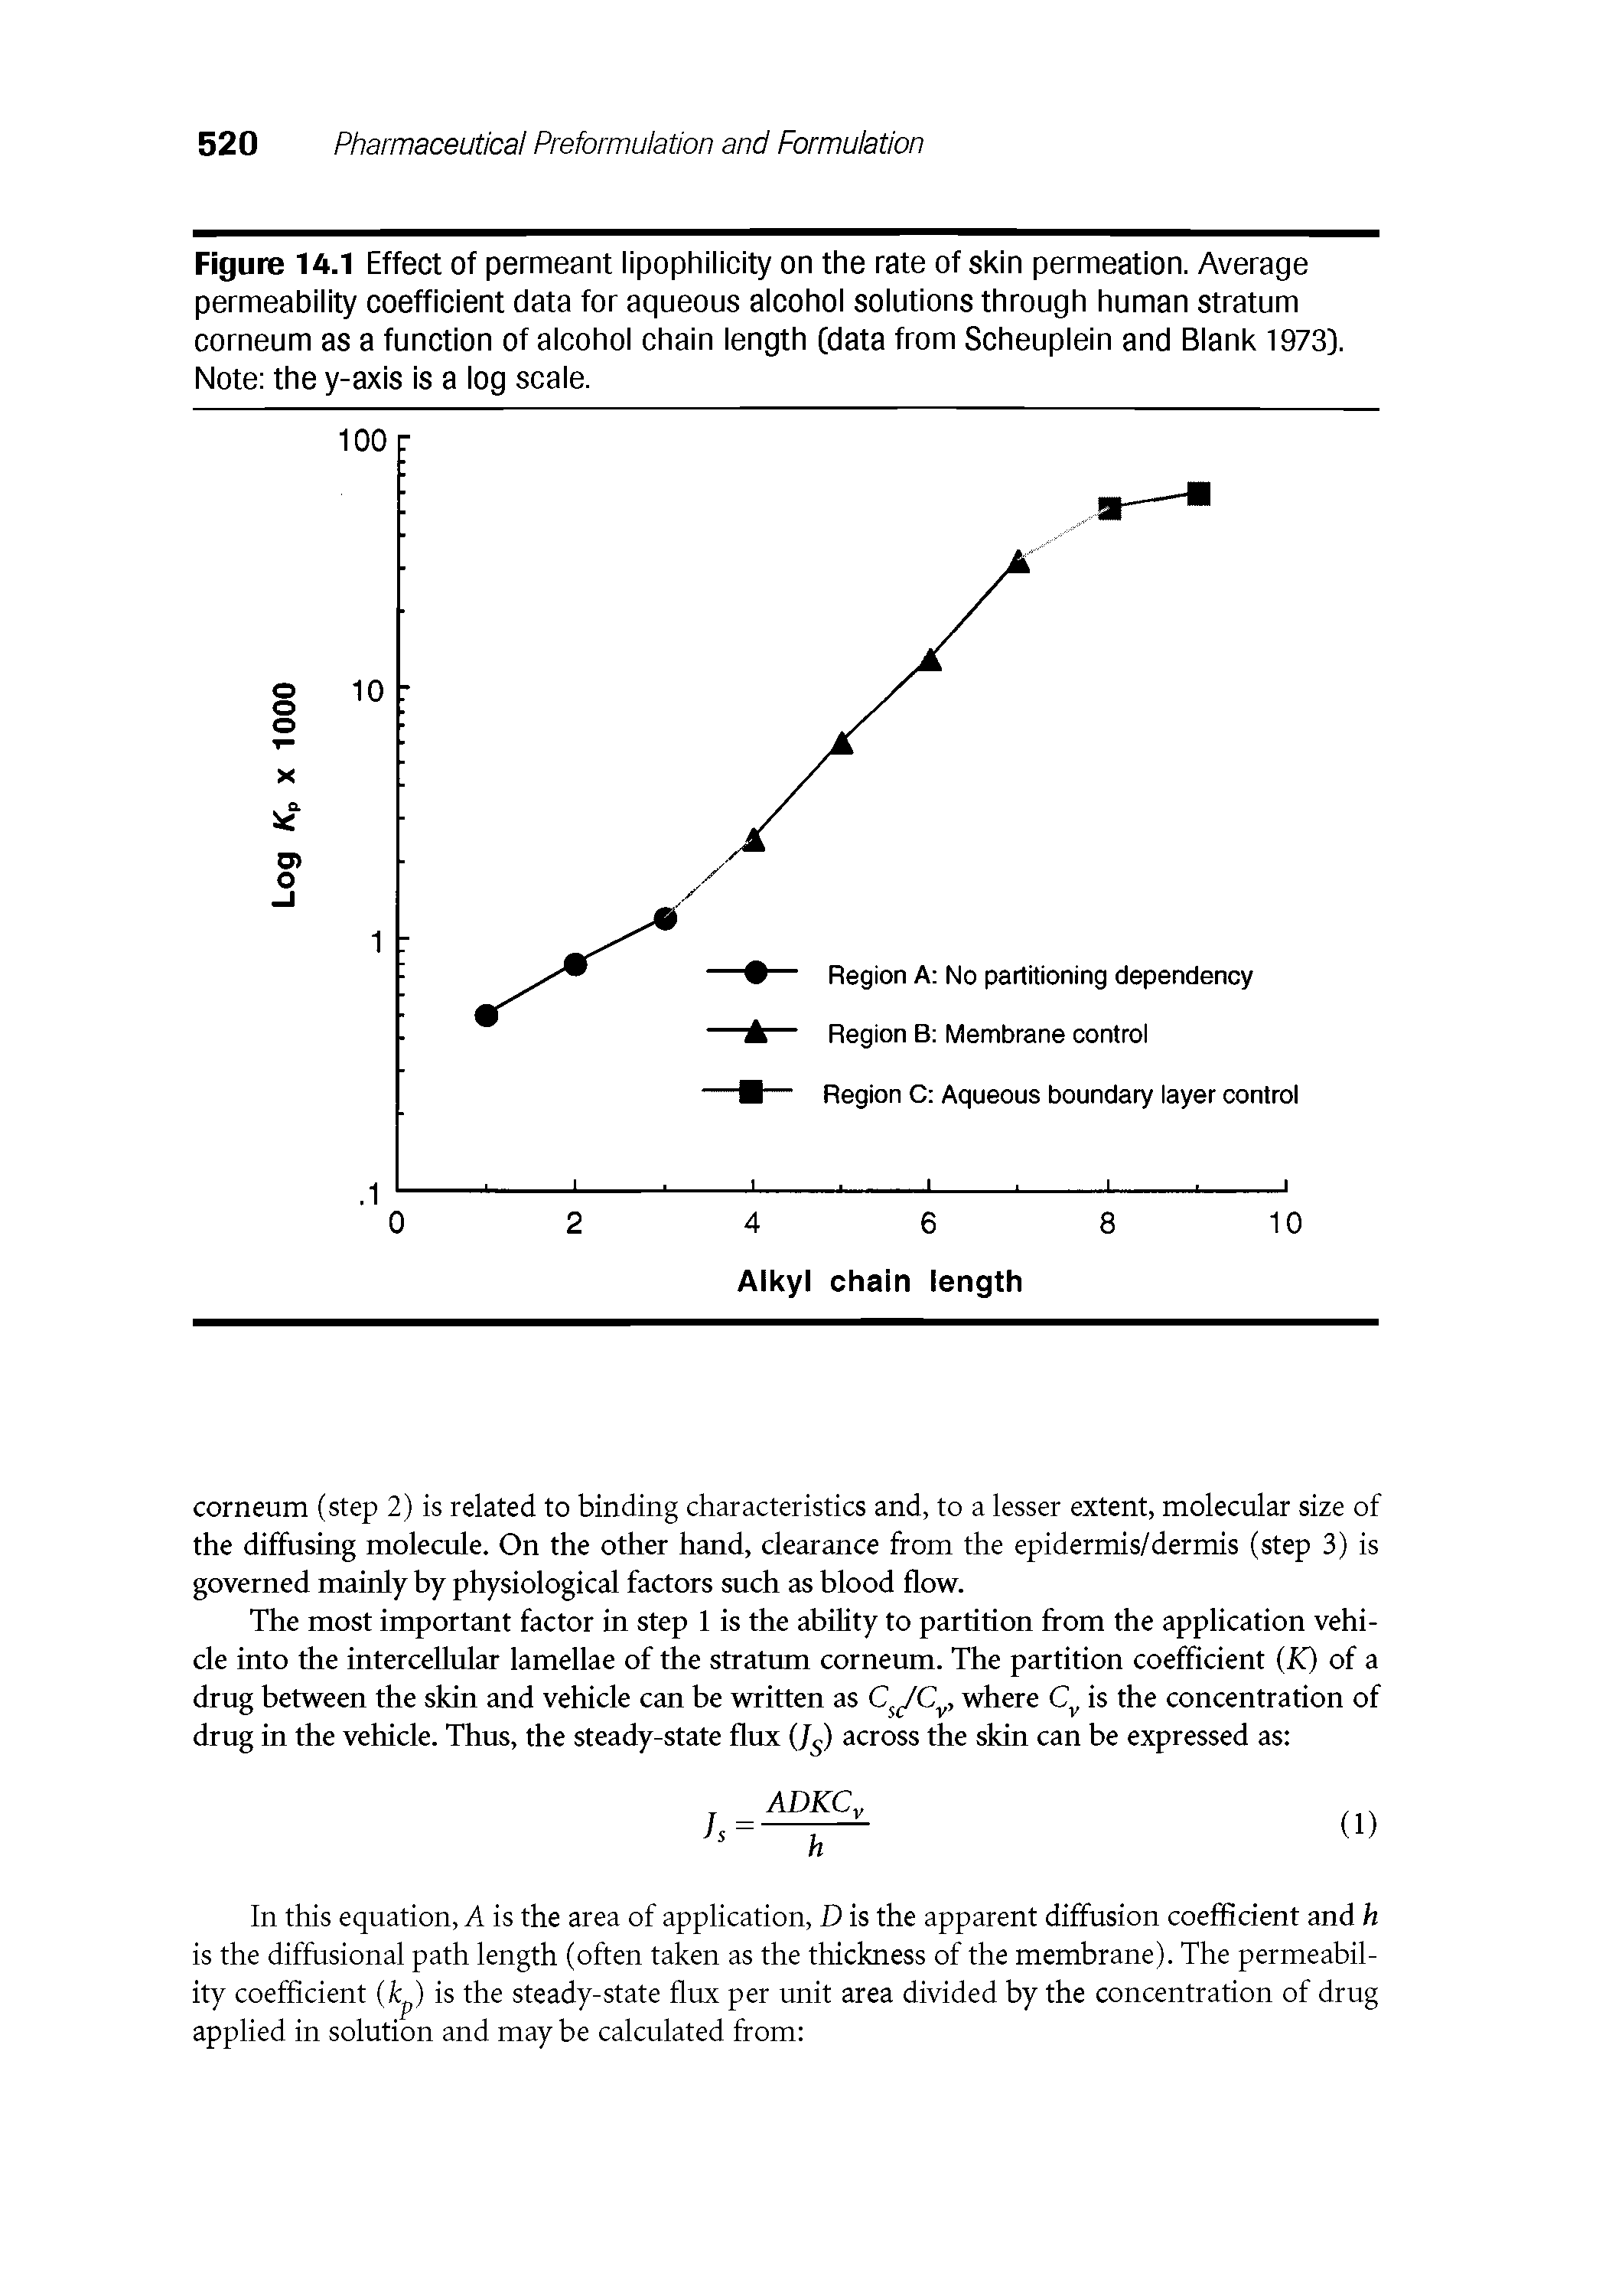 Figure 14.1 Effect of permeant lipophilicity on the rate of skin permeation. Average permeability coefficient data for aqueous alcohol solutions through human stratum corneum as a function of alcohol chain length (data from Scheuplein and Blank 1973],...